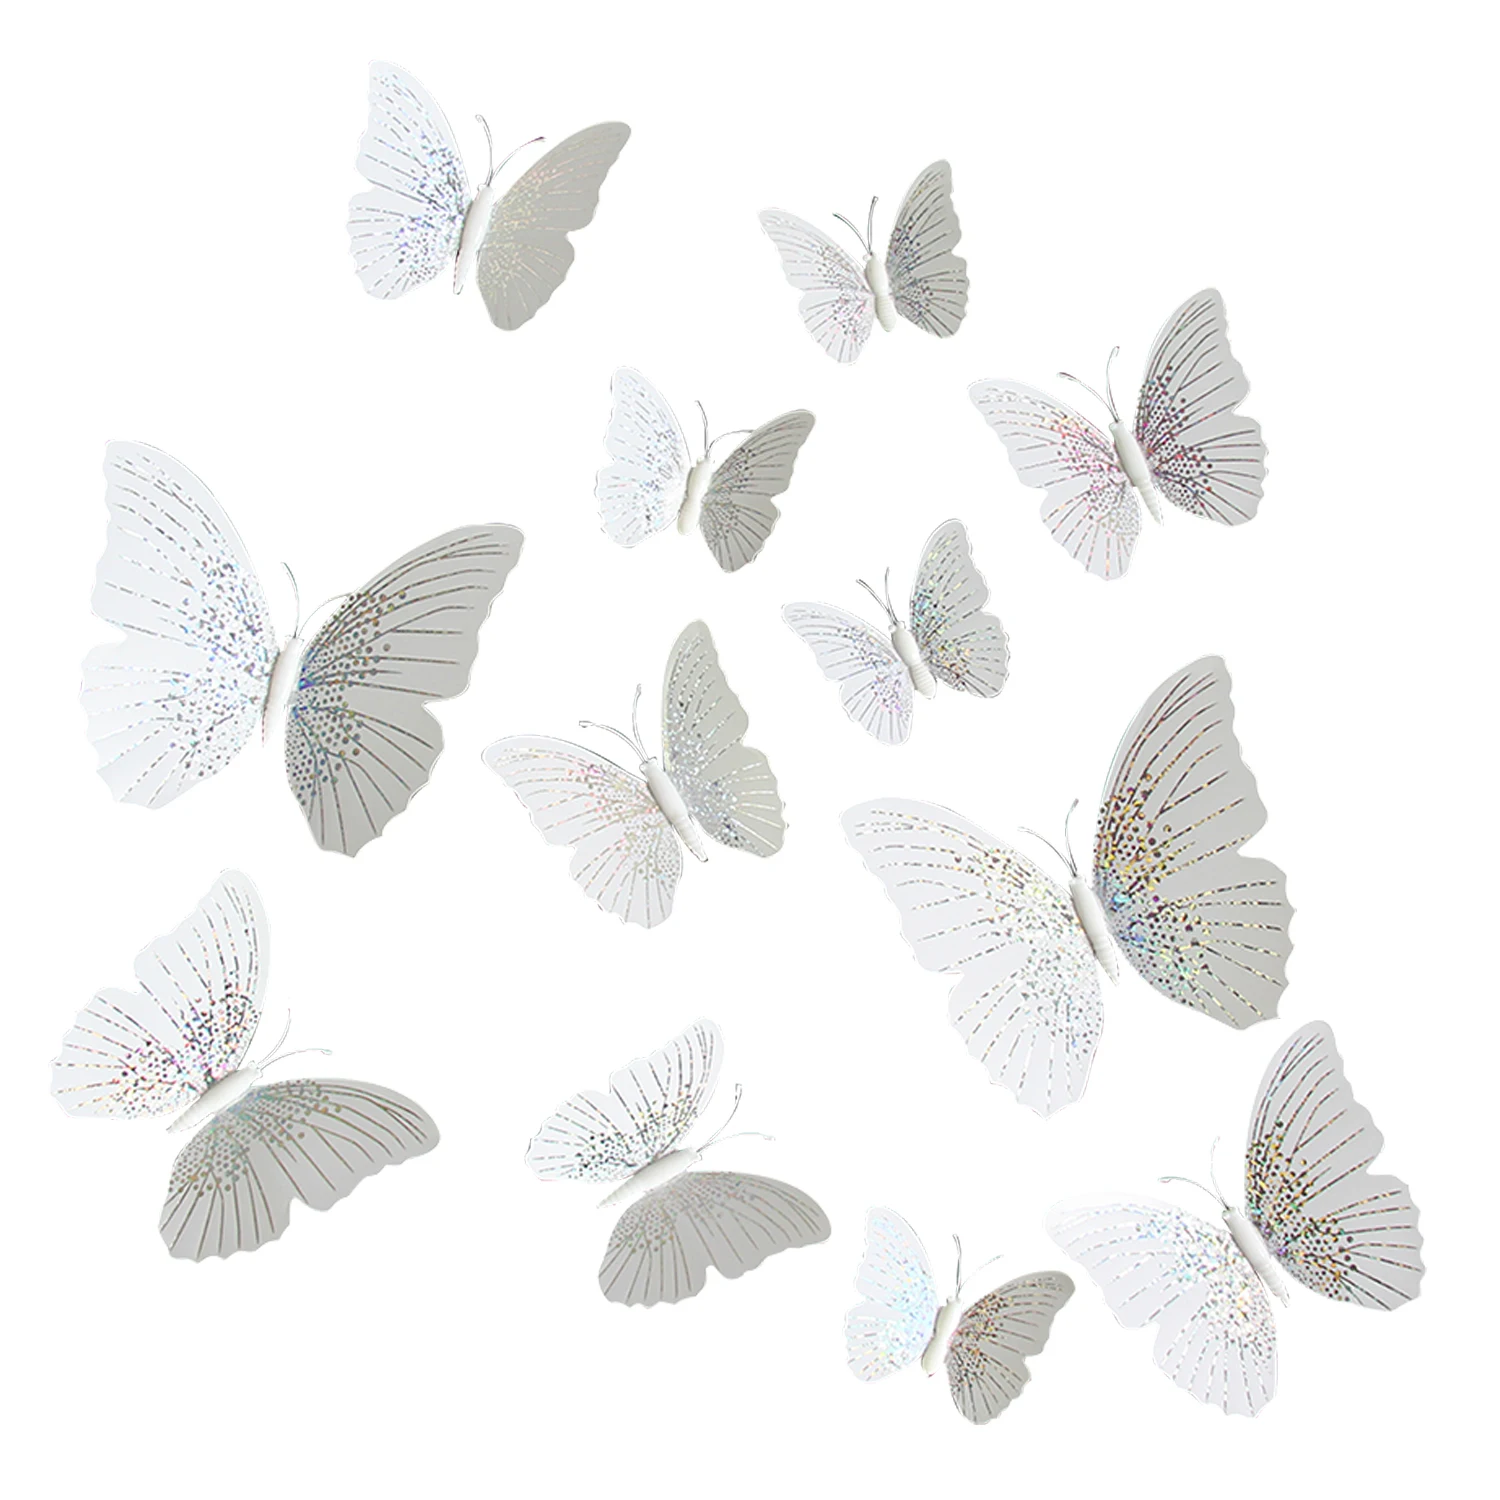 12Pcs Wall Stickers Colorful PVC Butterfly Shape Wall Decal Sticker Home Living Room Refrigerator Stickers DIY Art Decoration - Цвет: Белый